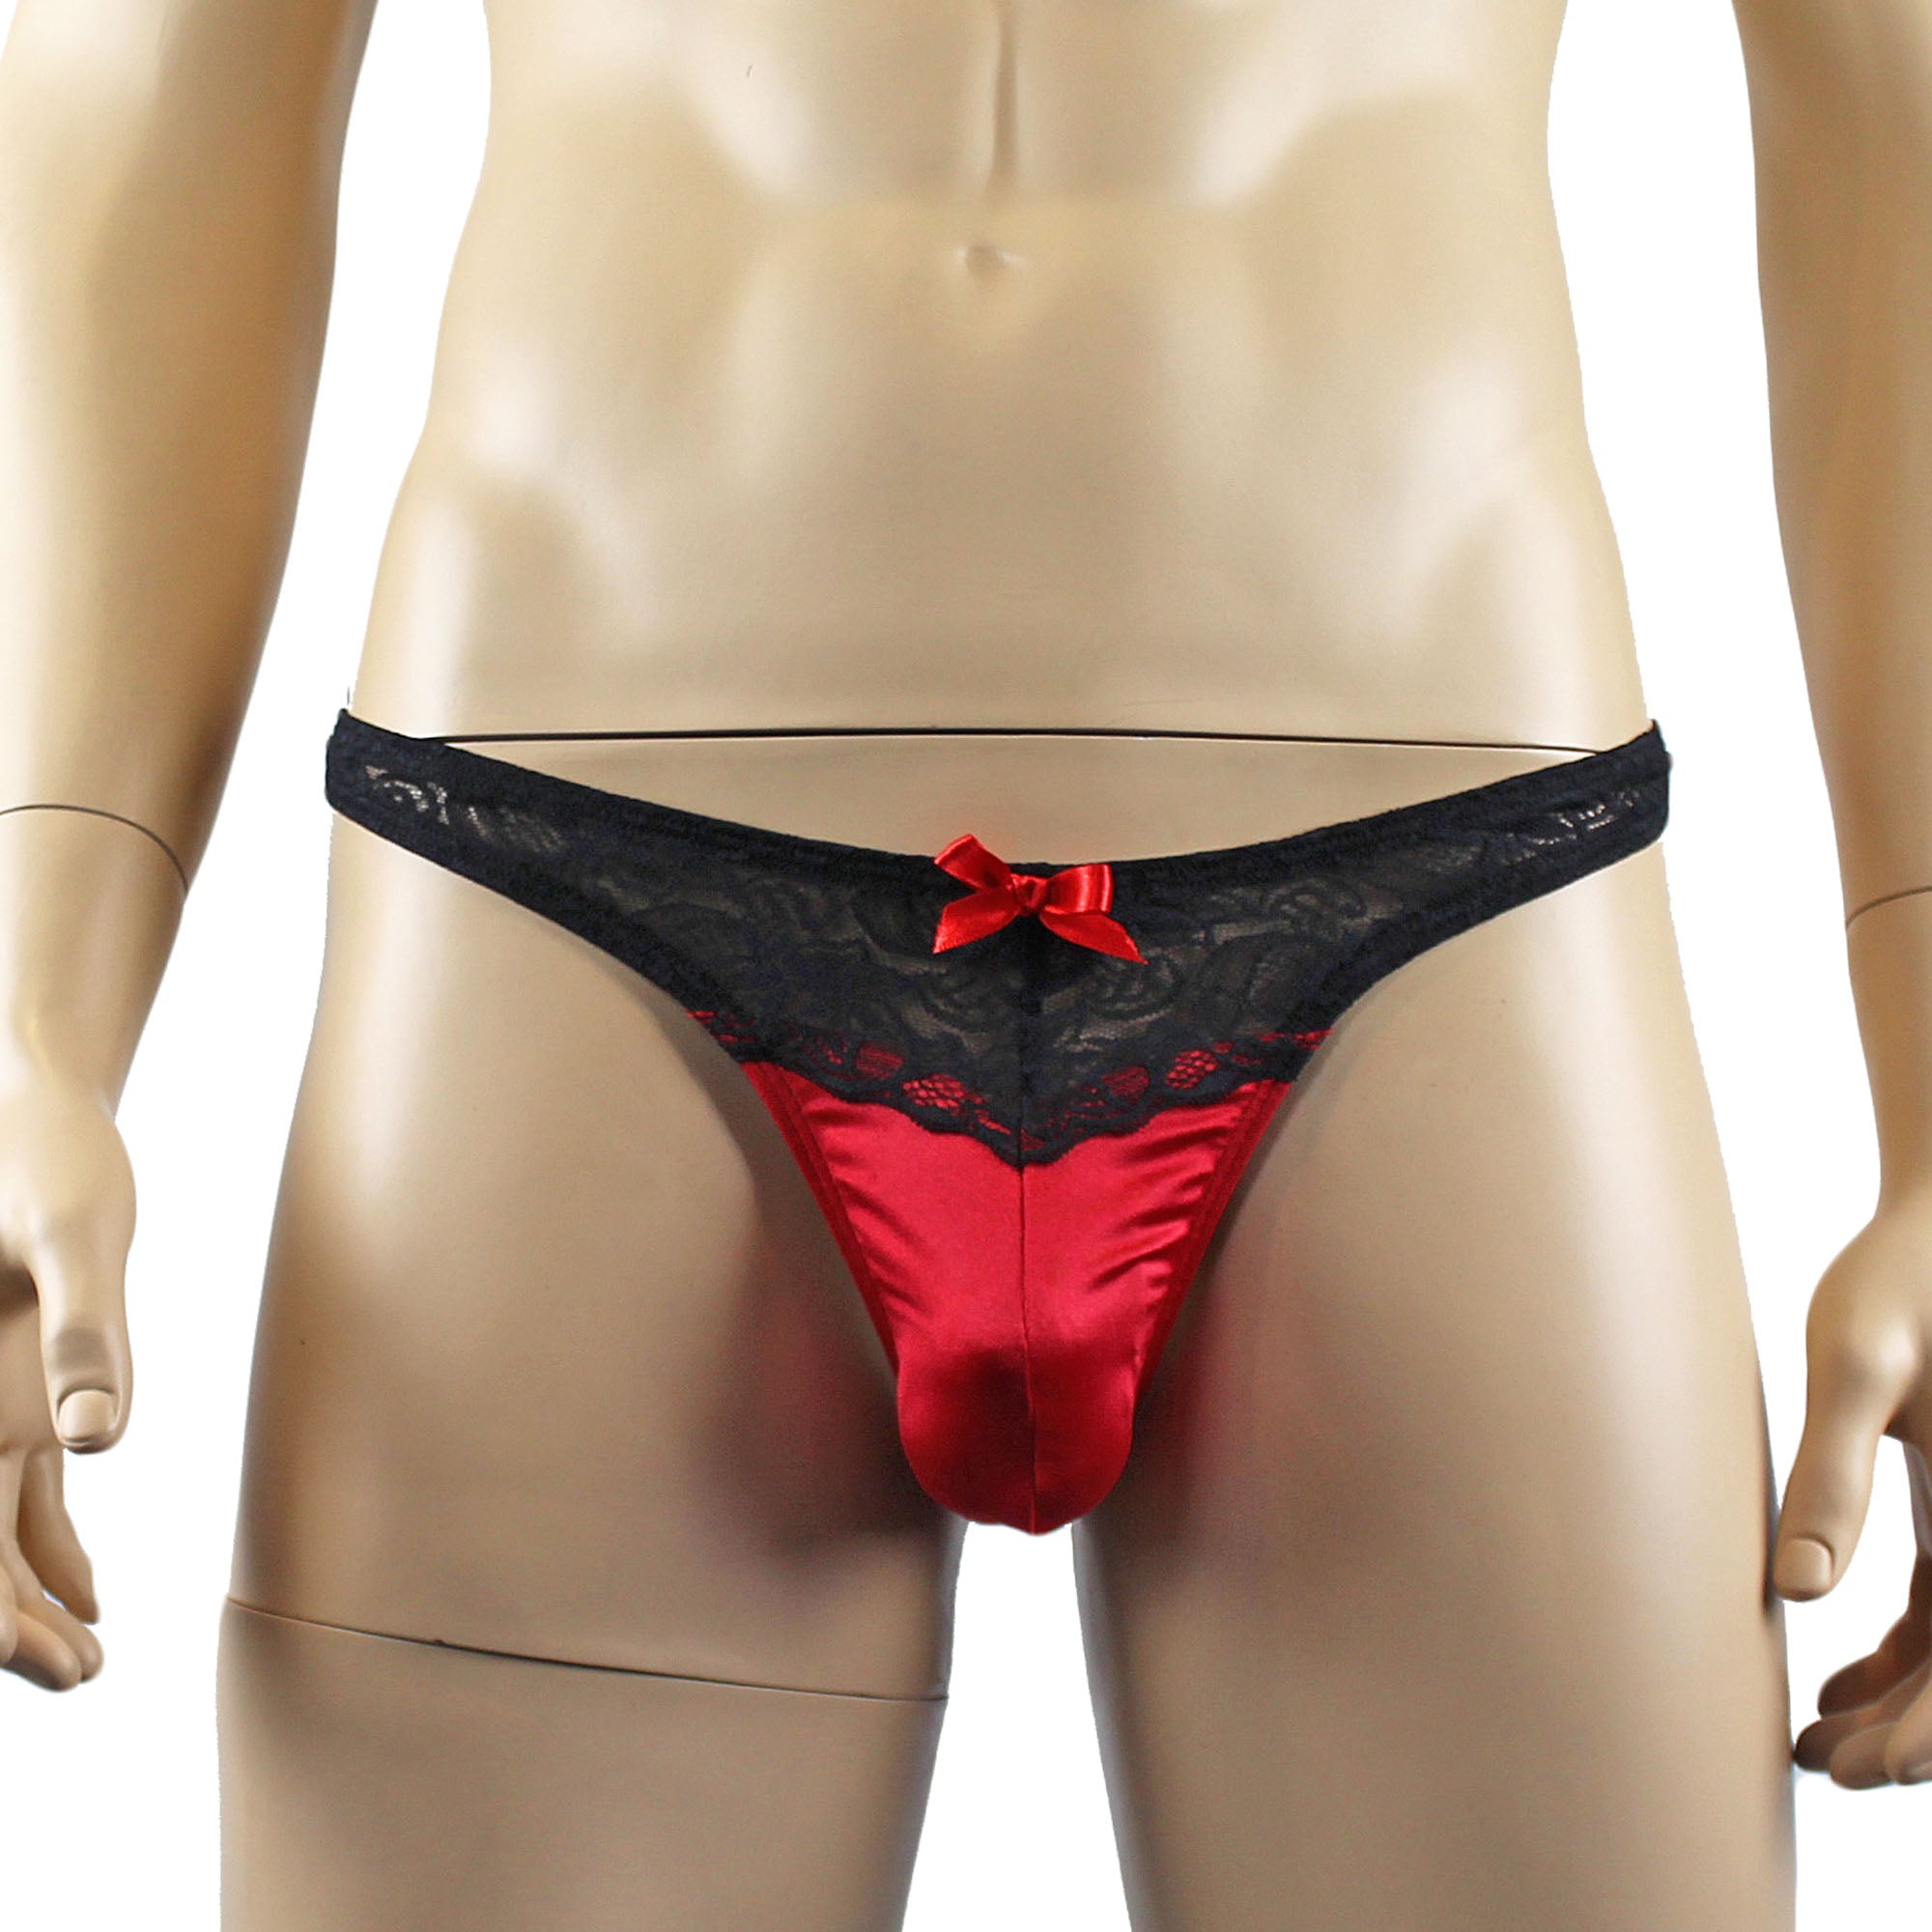 Mens Joanne Underwear Lacey Lovelies Thong Red and Black Lace